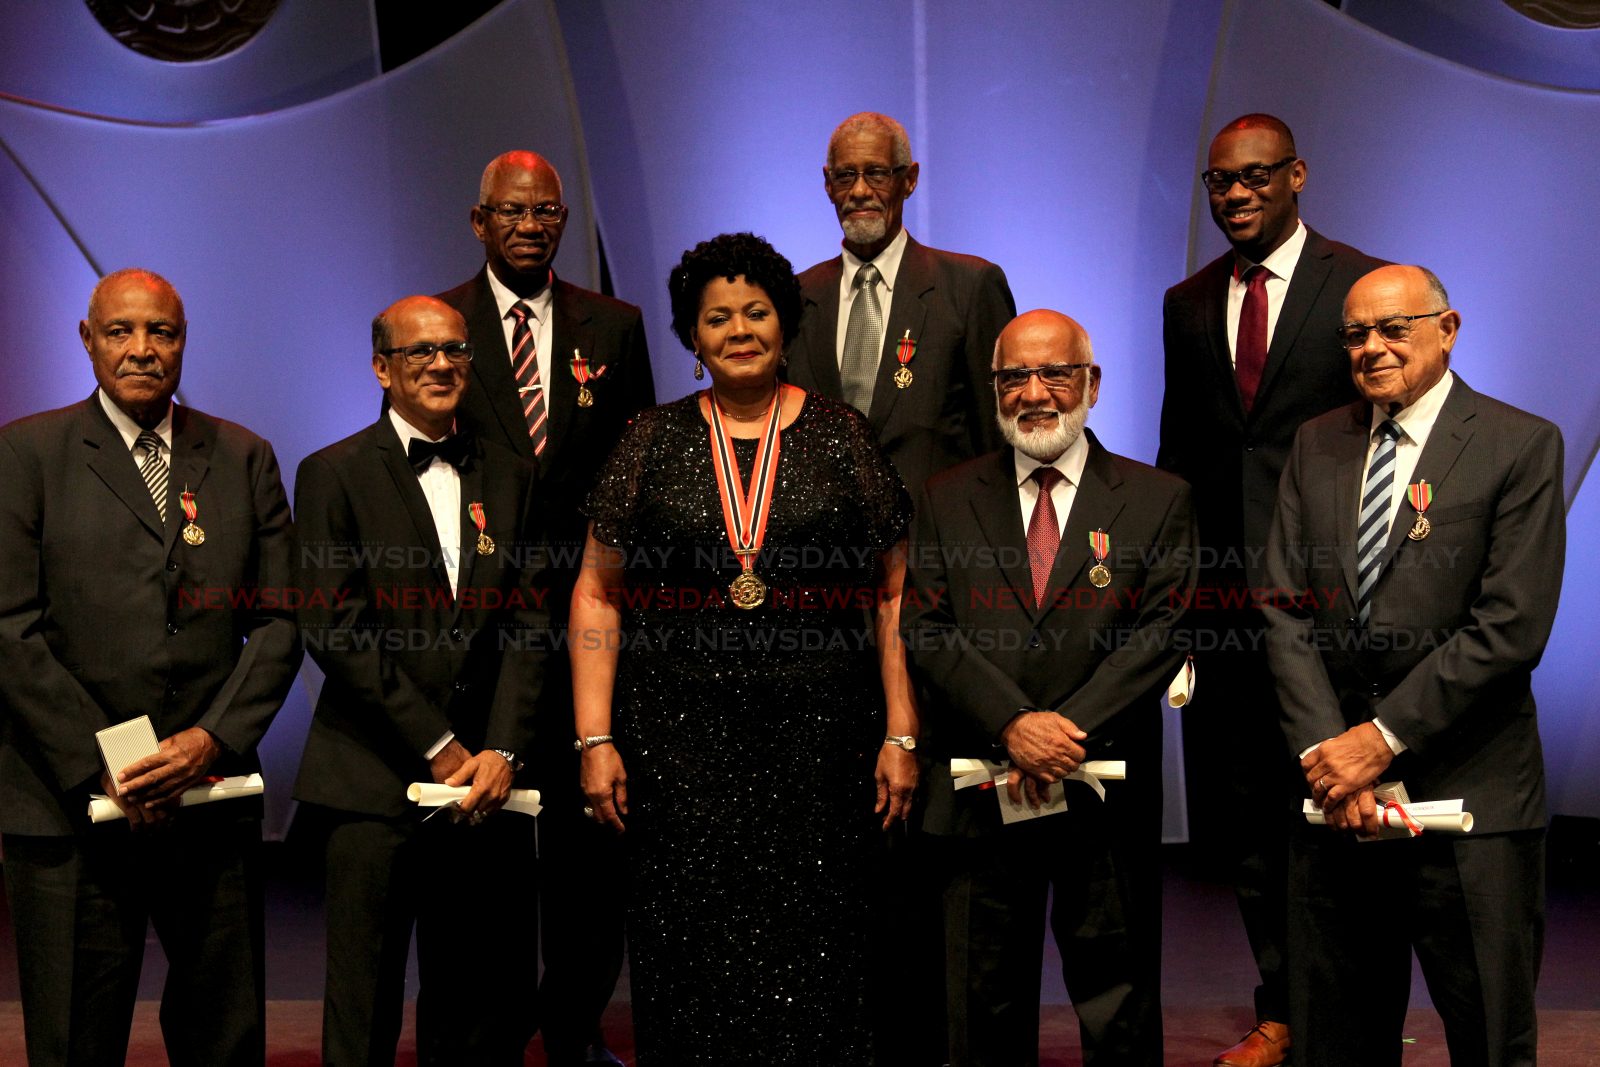 The 50th annual National Awards ceremony Trinidad and Tobago Newsday